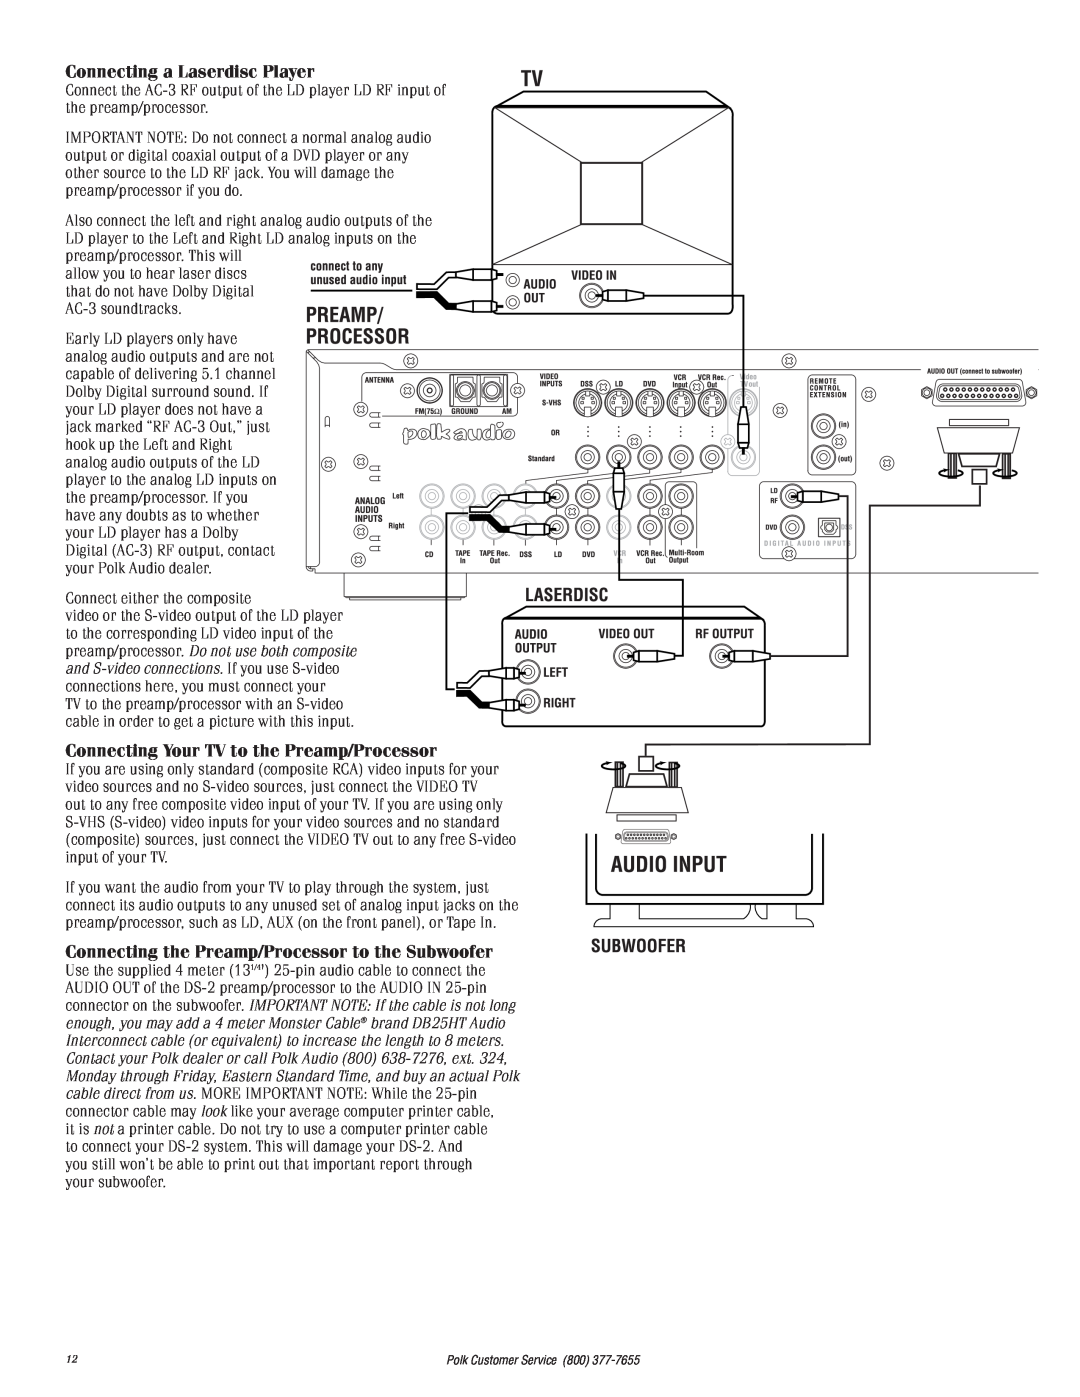 Polk Audio 2 instruction manual Connecting a Laserdisc Player, Connecting Your TV to the Preamp/Processor 